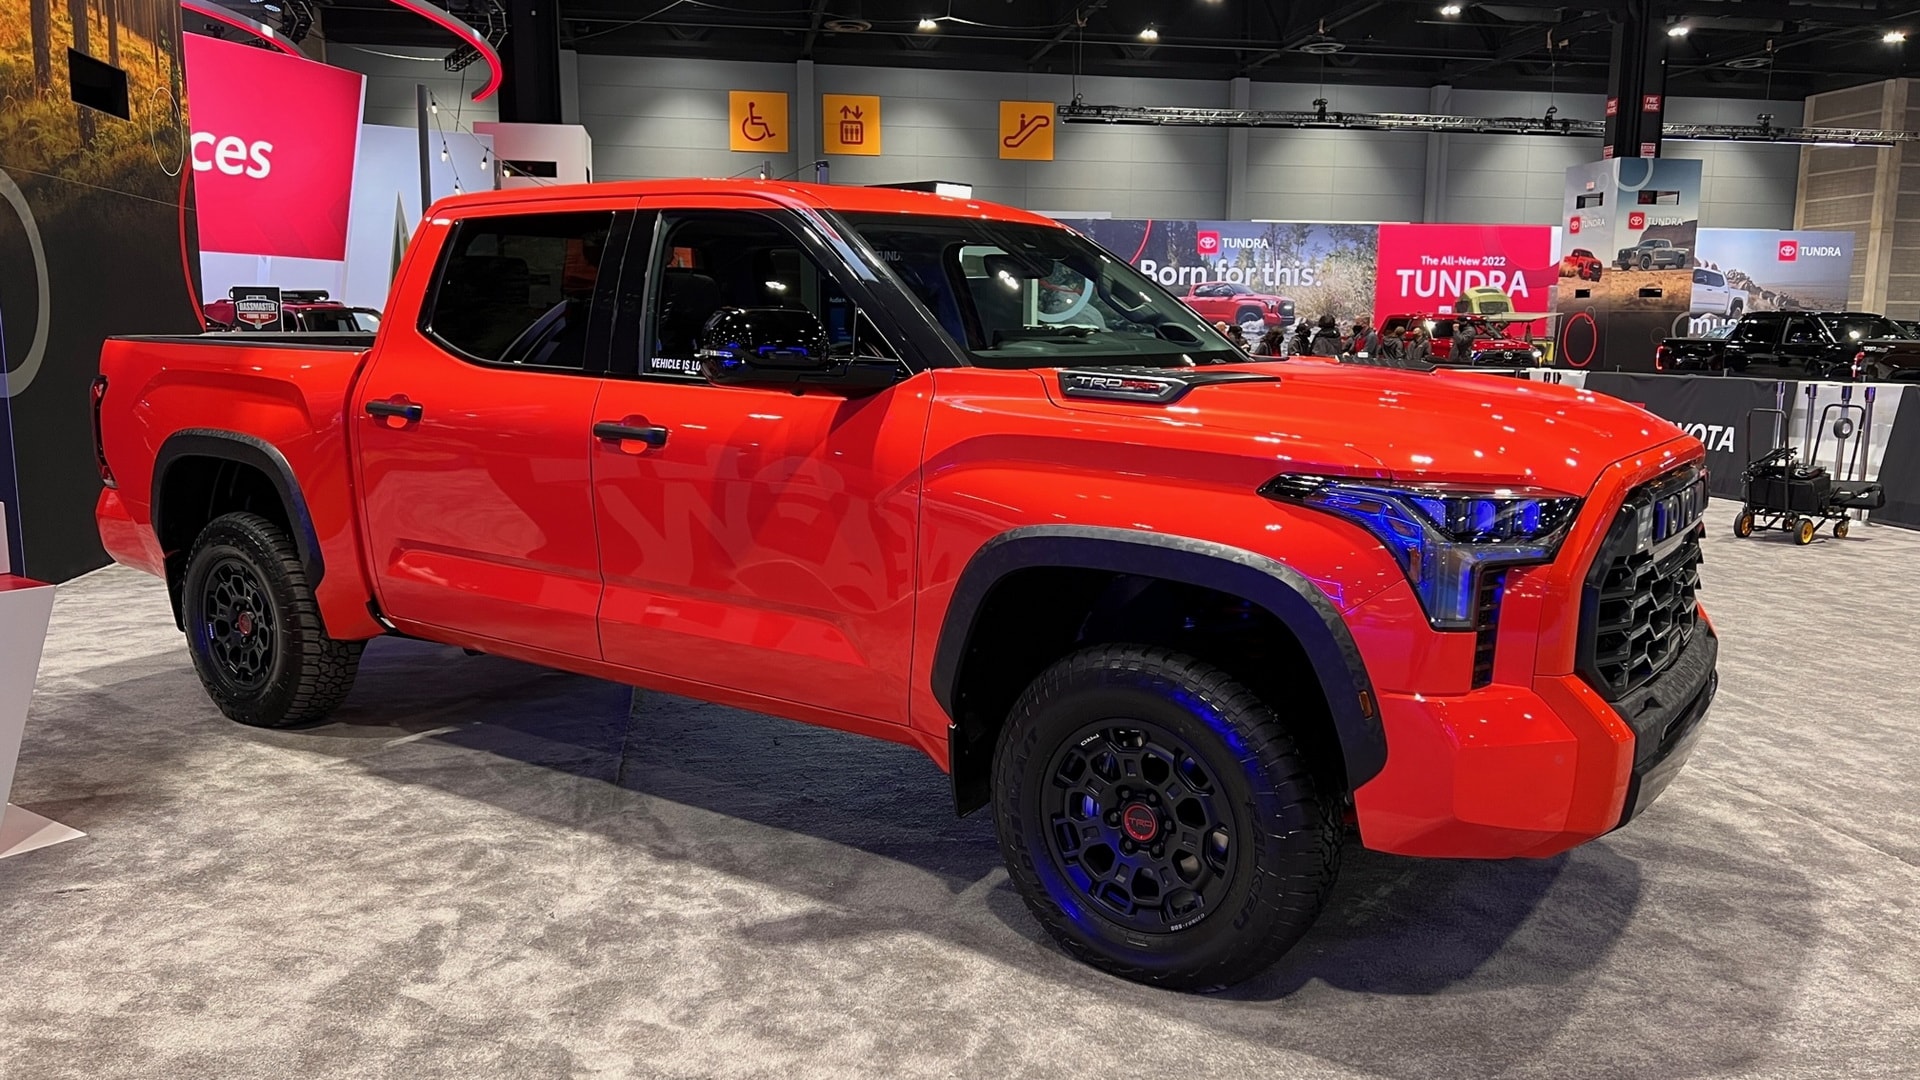 2022 Toyota Tundra TRD Pro Looks “Ford Tough”, Goes to Chicago Wearing